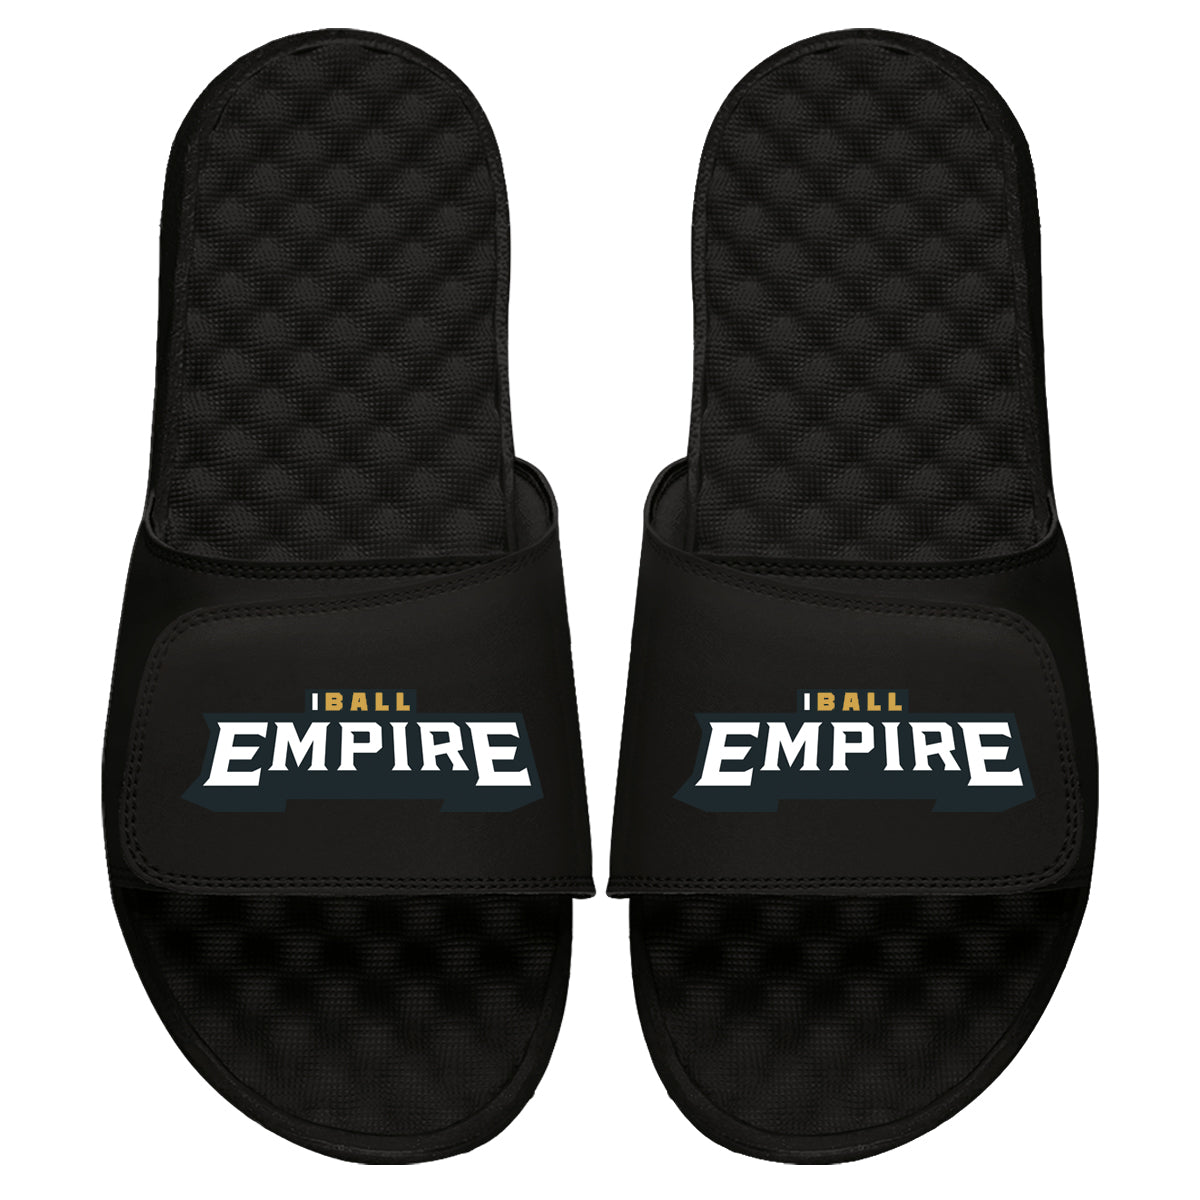 iBall Empire Text Gold Slides